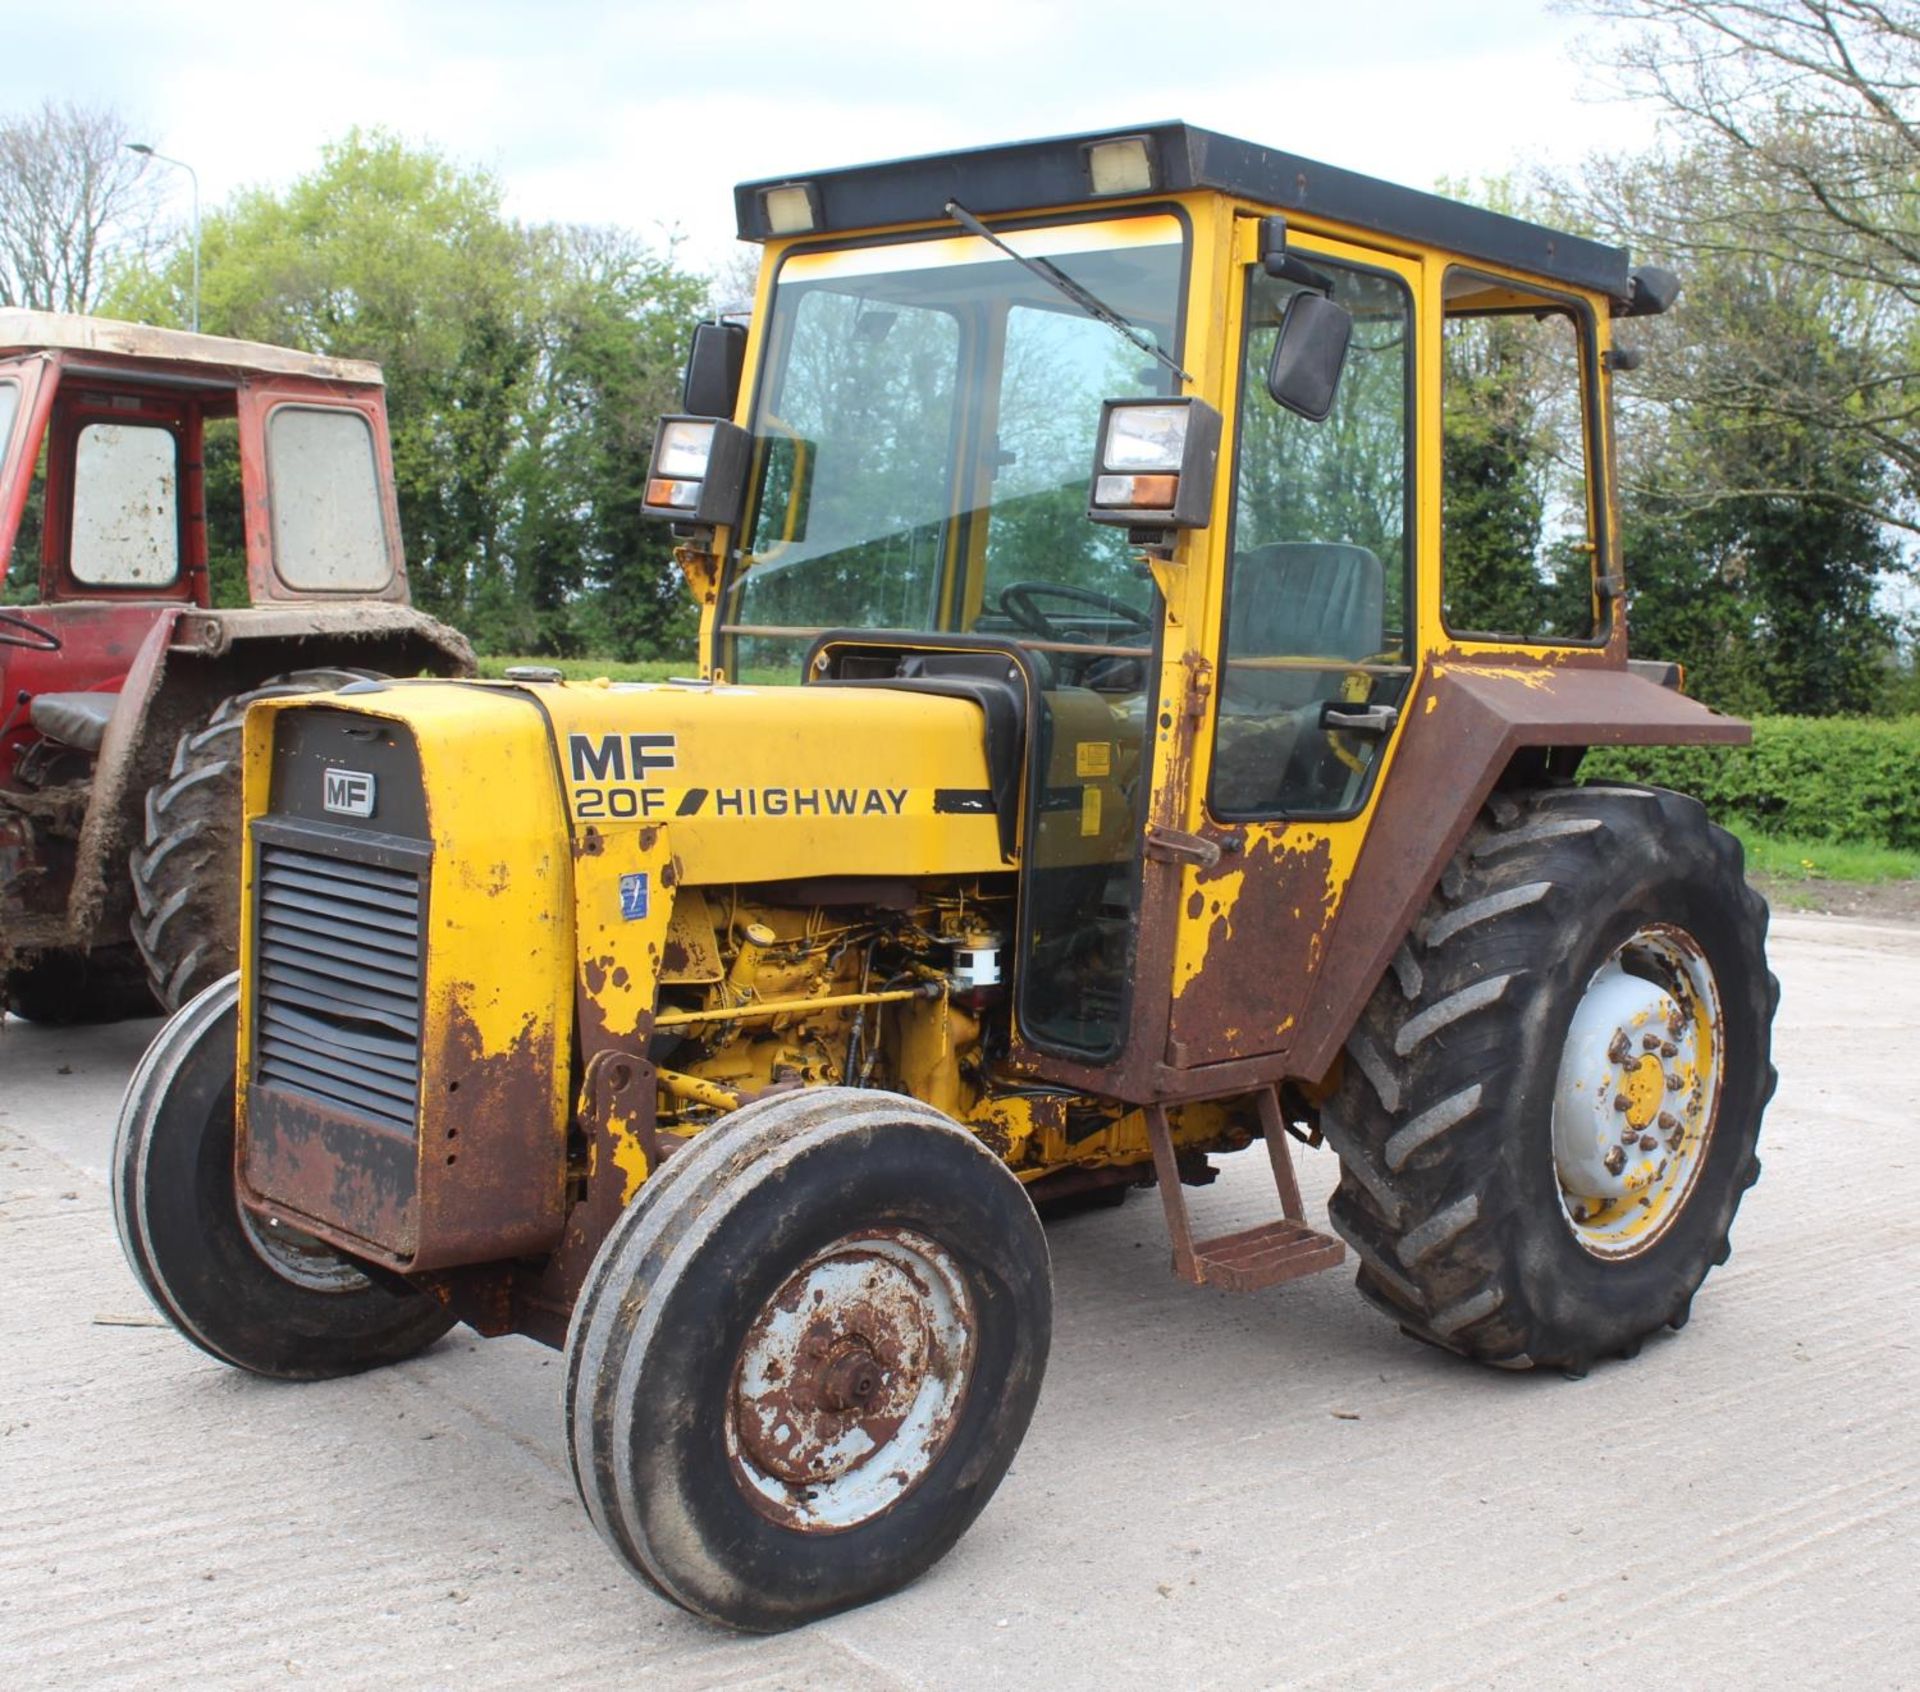 A MASSEY FERGUSON 20F 2WD INDUSTRIAL TRACTOR NO V5 SERIAL NUMBER 5101 C 0571 BELIEVED 1988 ONE OWNER